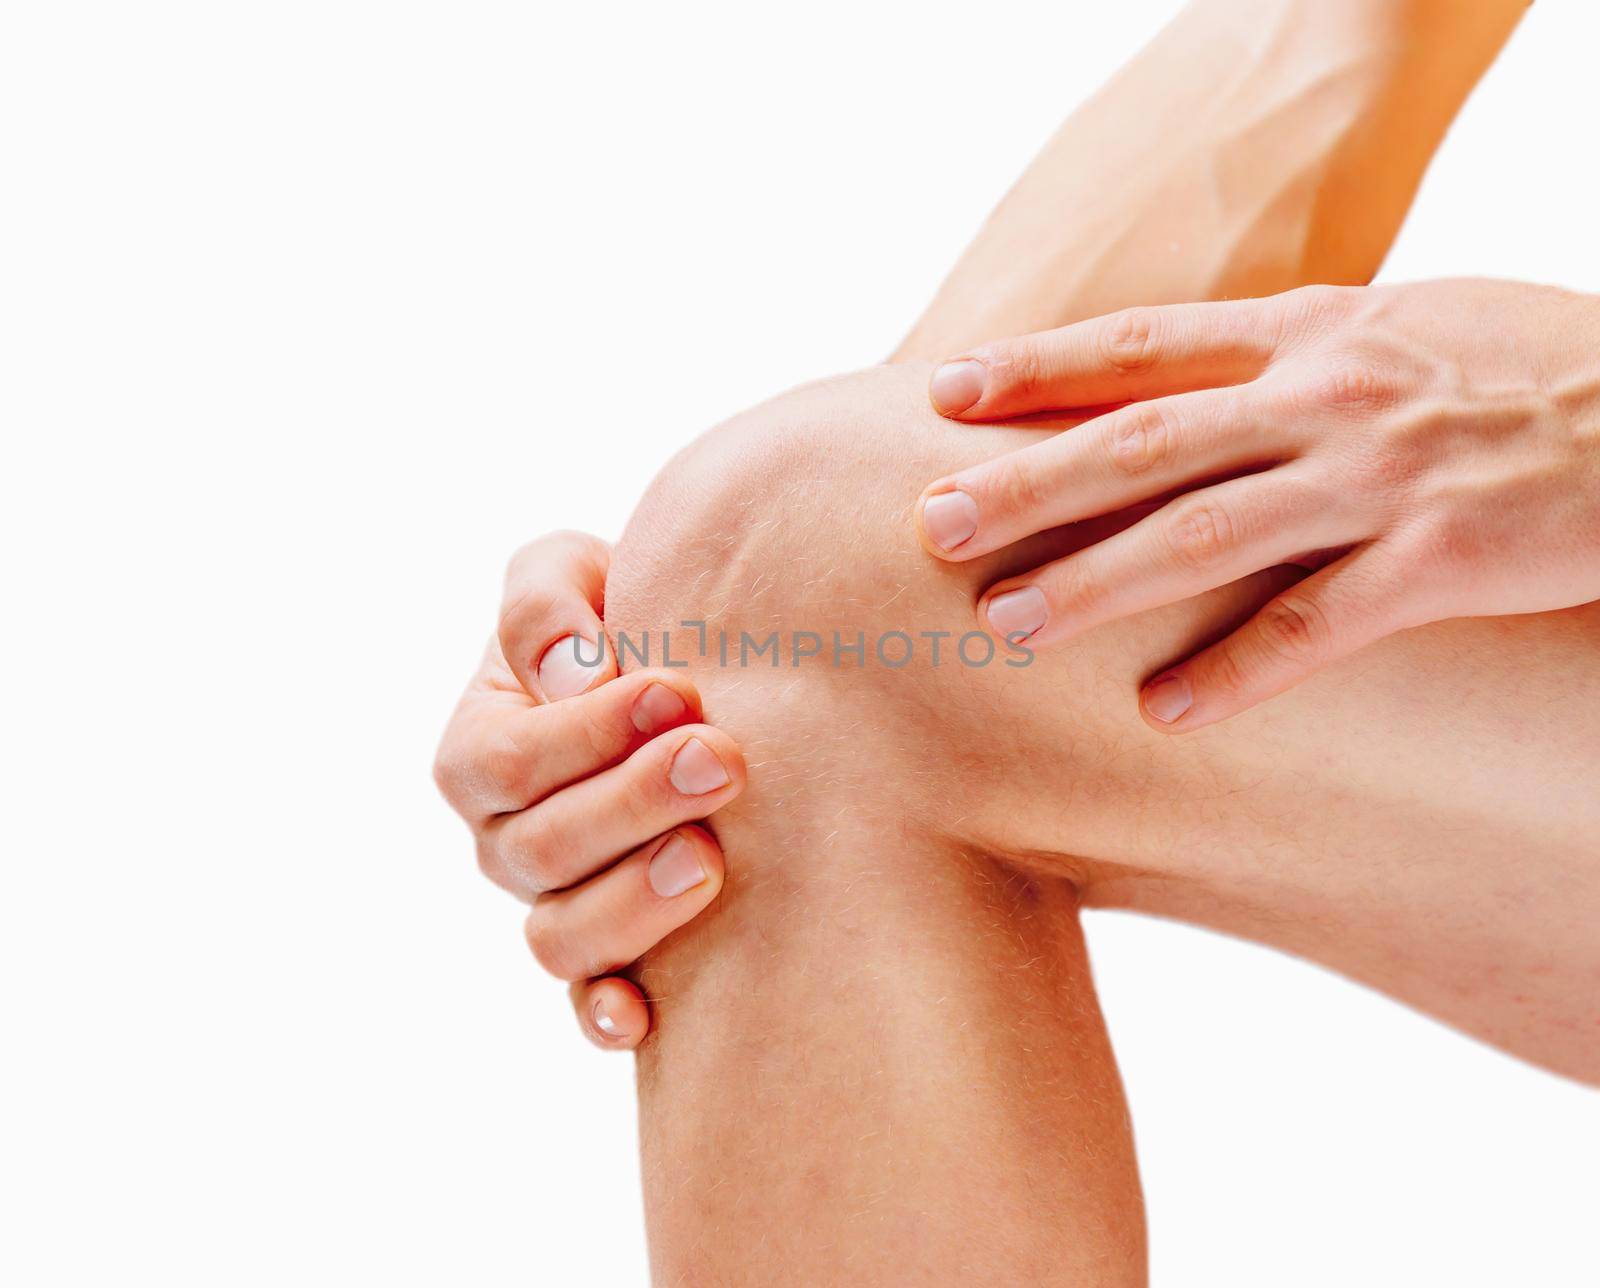 Pain in the knee joint. On a white background